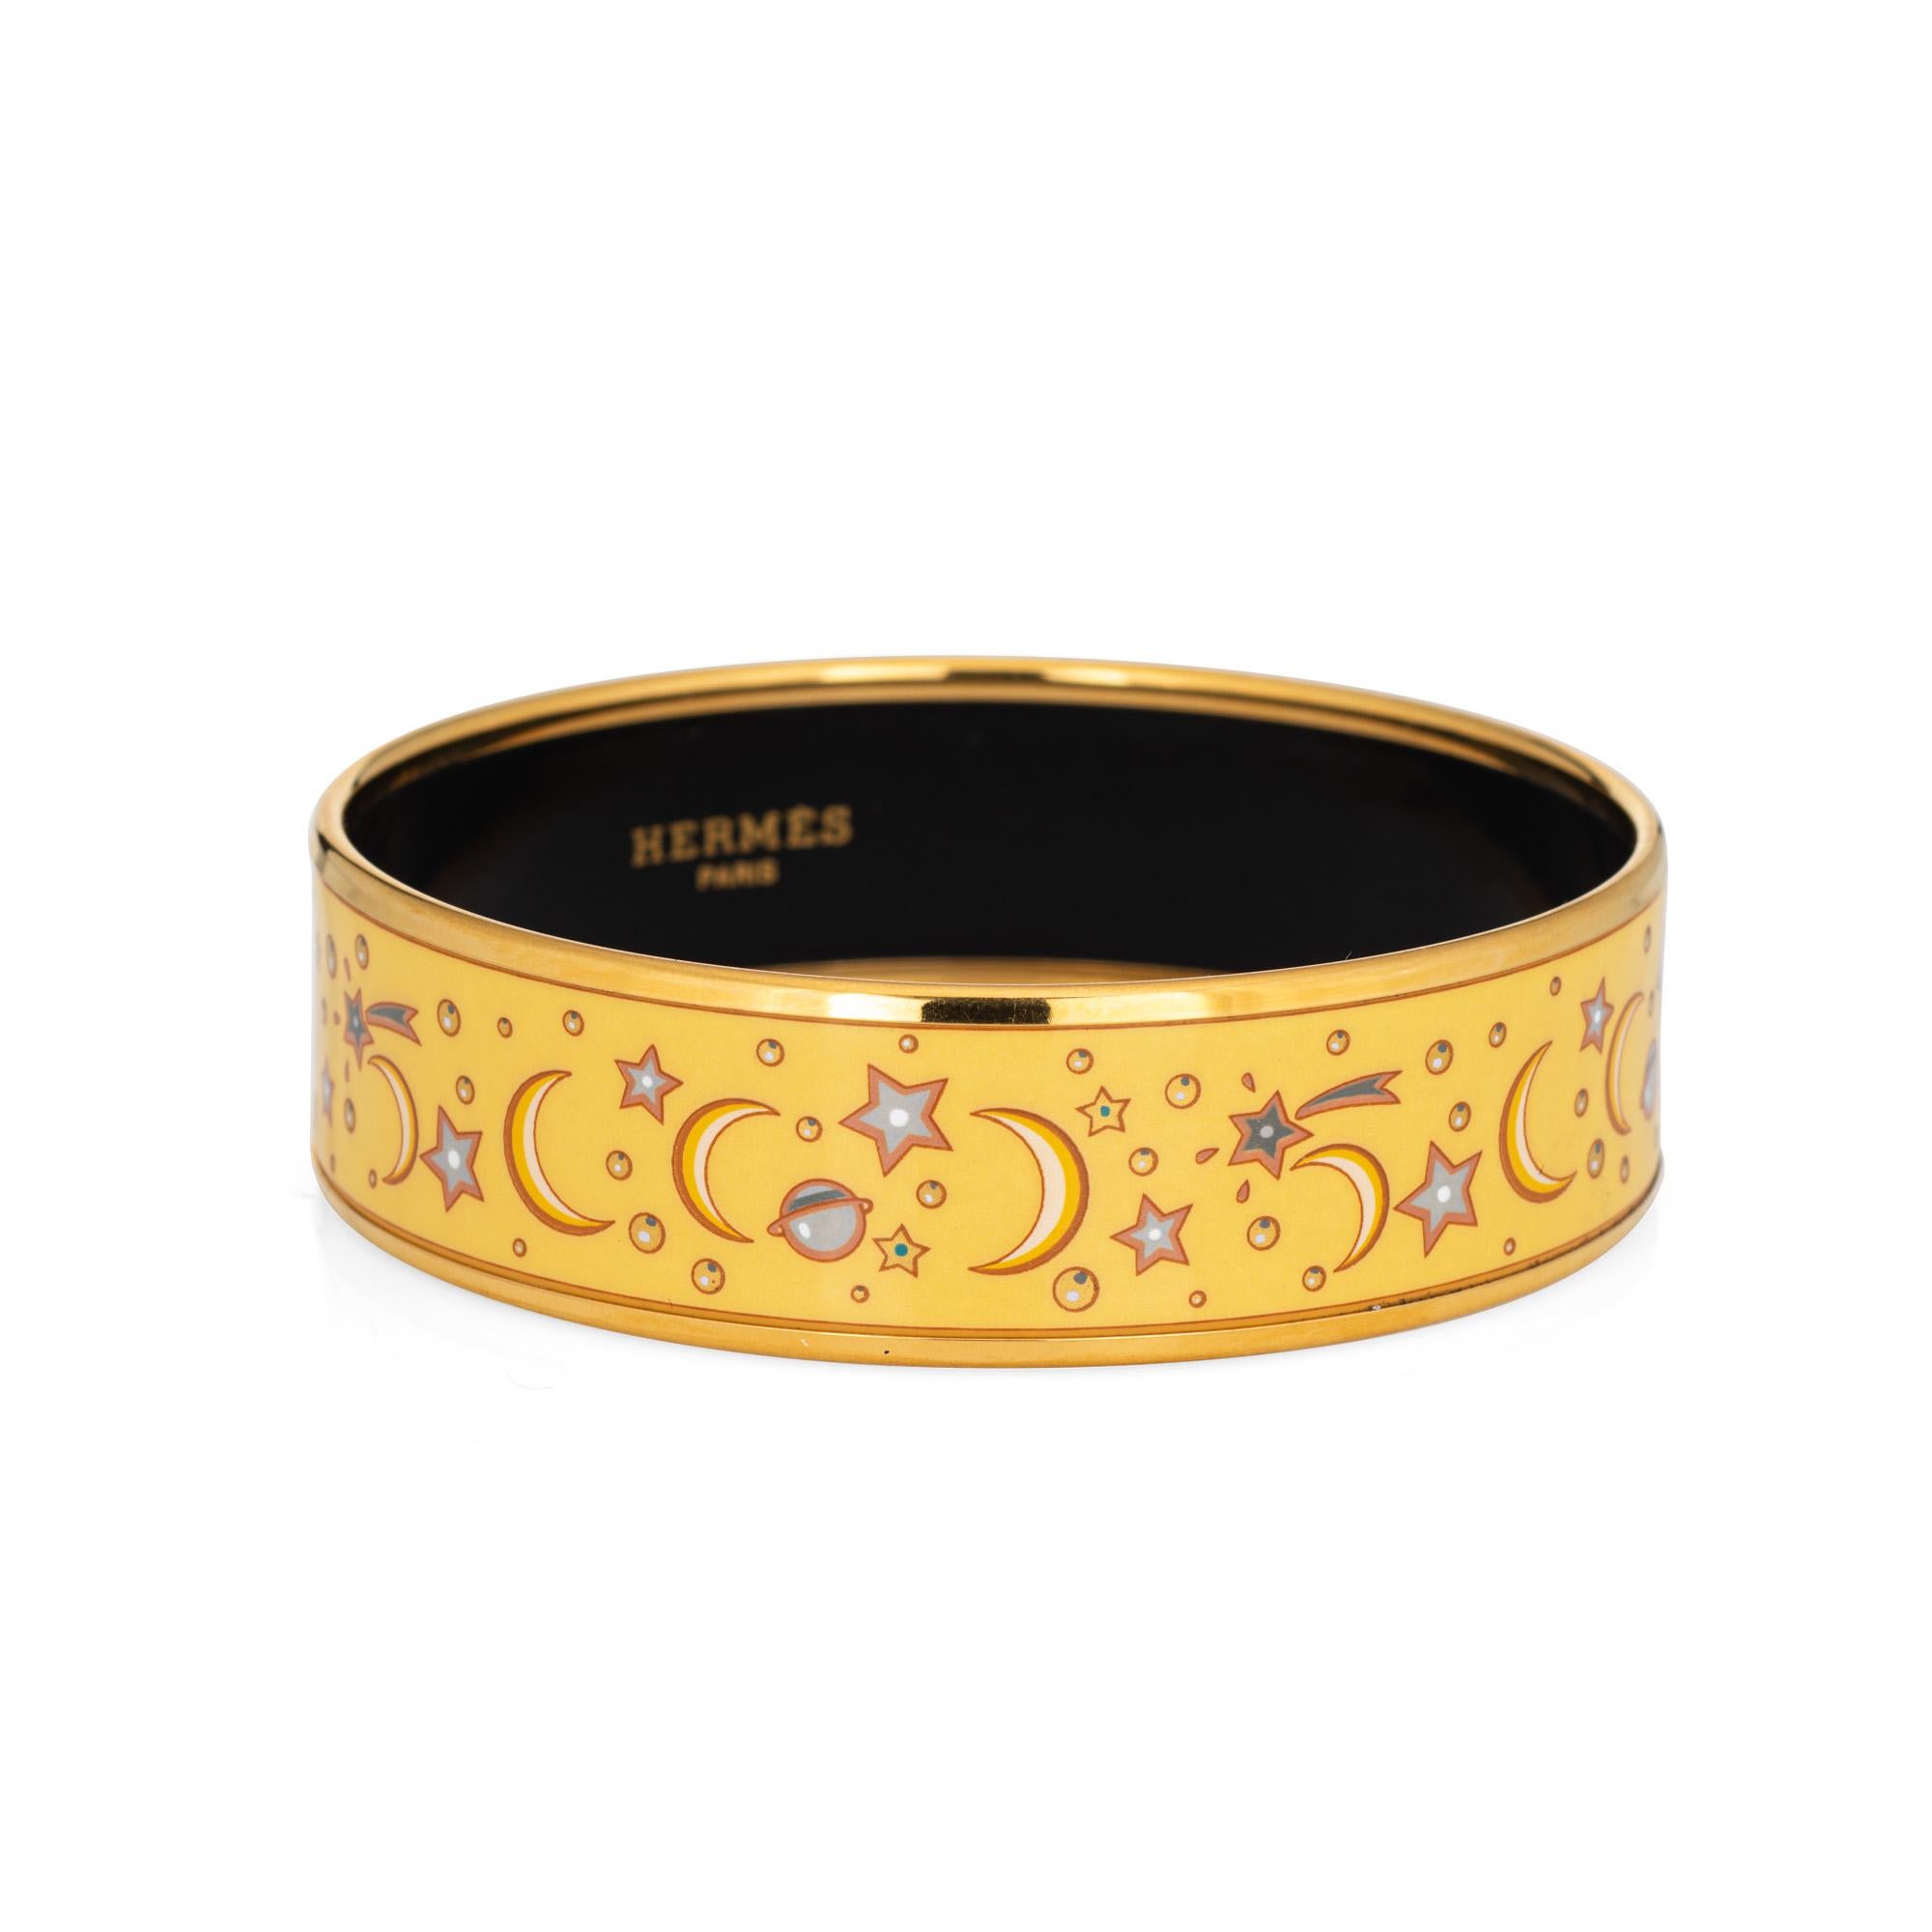 Overview:

Pre-owned Hermes enamel bangle bracelet with a yellow celestial crescent moon and shooting star pattern. 

The wide 0.70